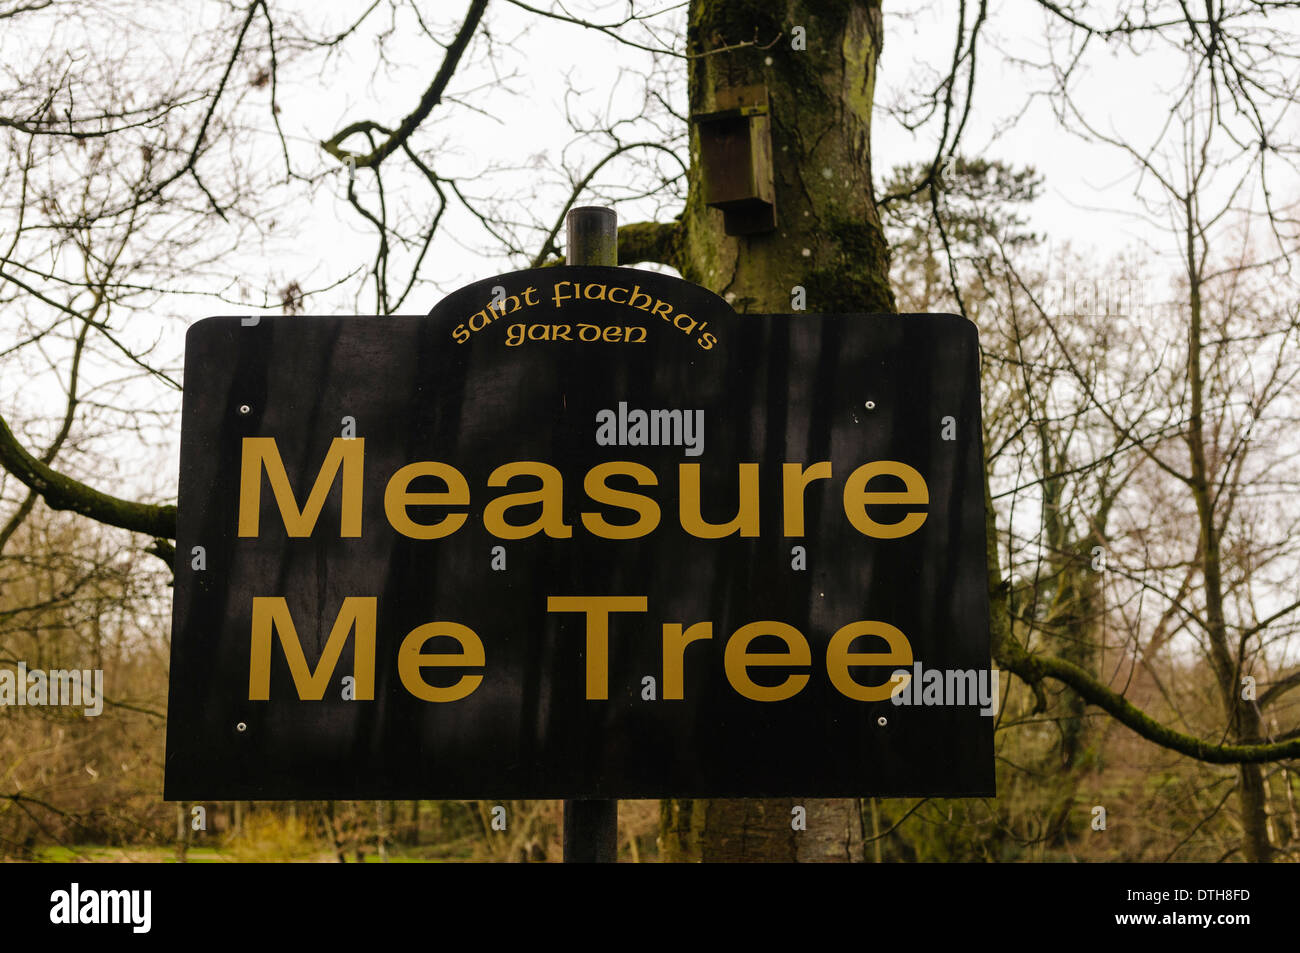 The 'Measure Me Tree' at St. Fiachra's Garden, Irish National Stud, Kildare, which children can measure using Pythagoras' Theorem. Stock Photo